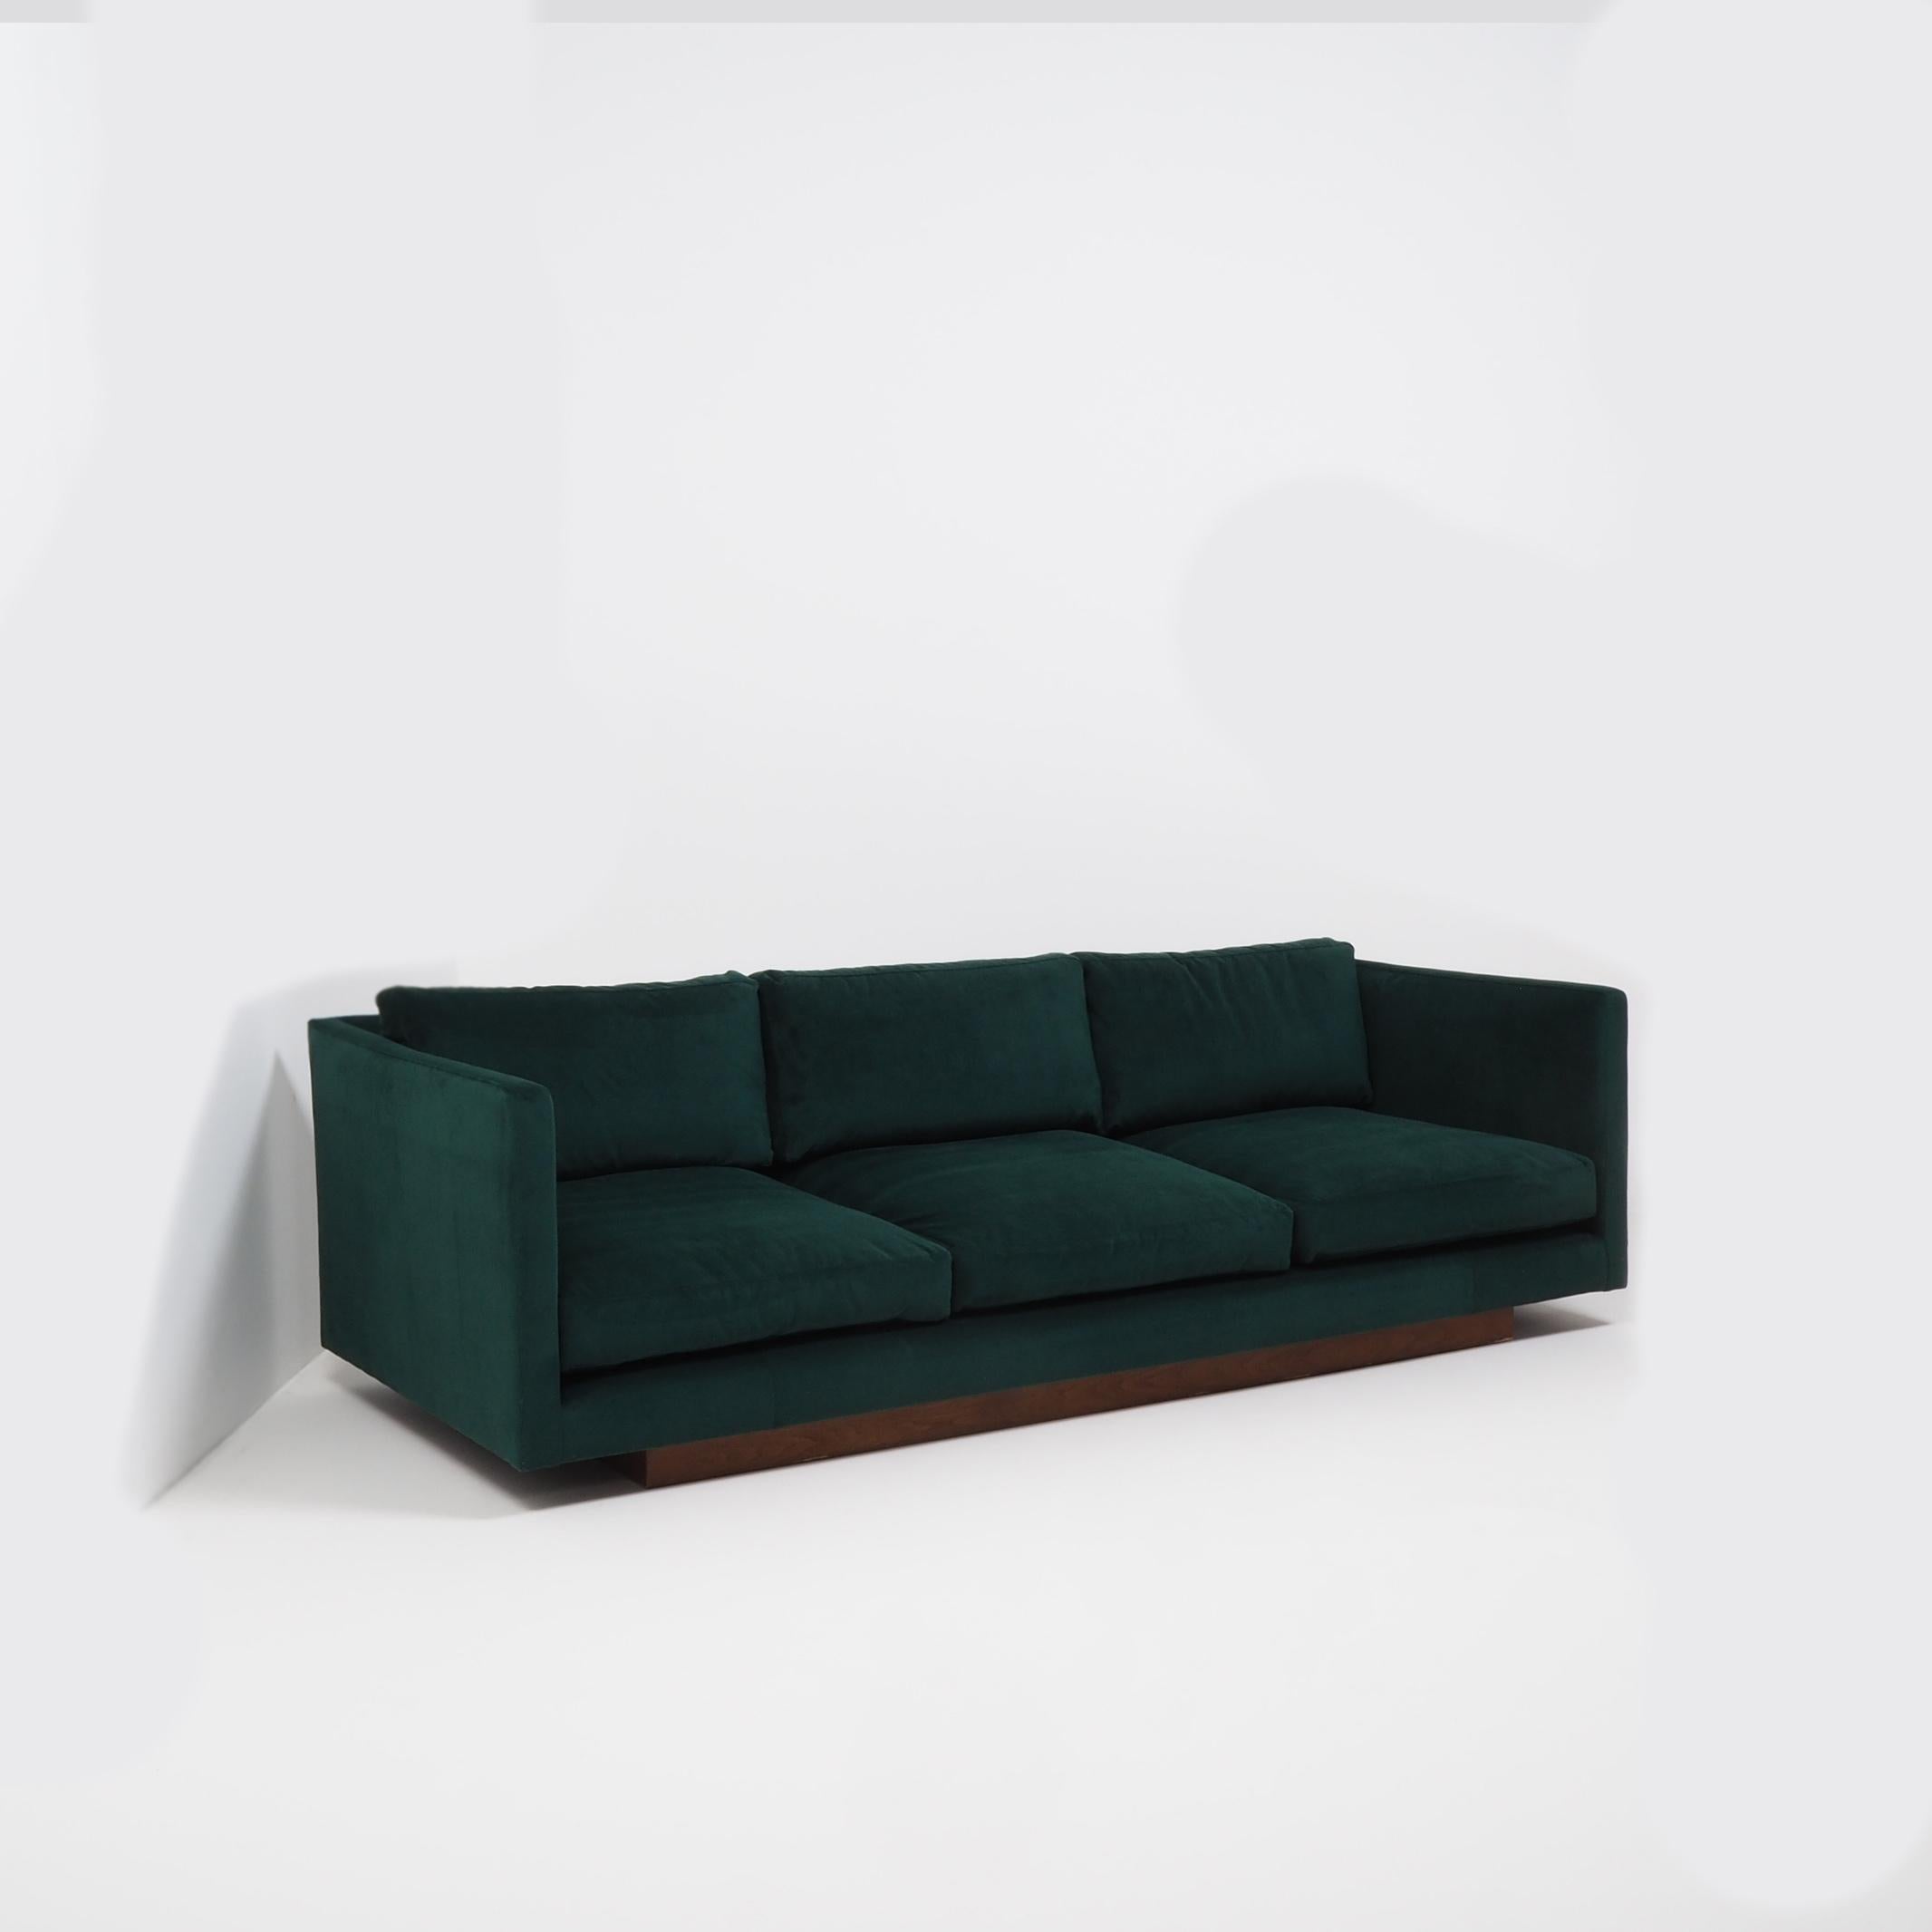 A Minimalist 1960s design, this tuxedo three-seat sofa has been newly and fully reupholstered in sumptuous forest green velvet.
 
Designed by Milo Baughman for Thayer Coggin, the sofa features a slim, angular Silhouette with a set back wooden